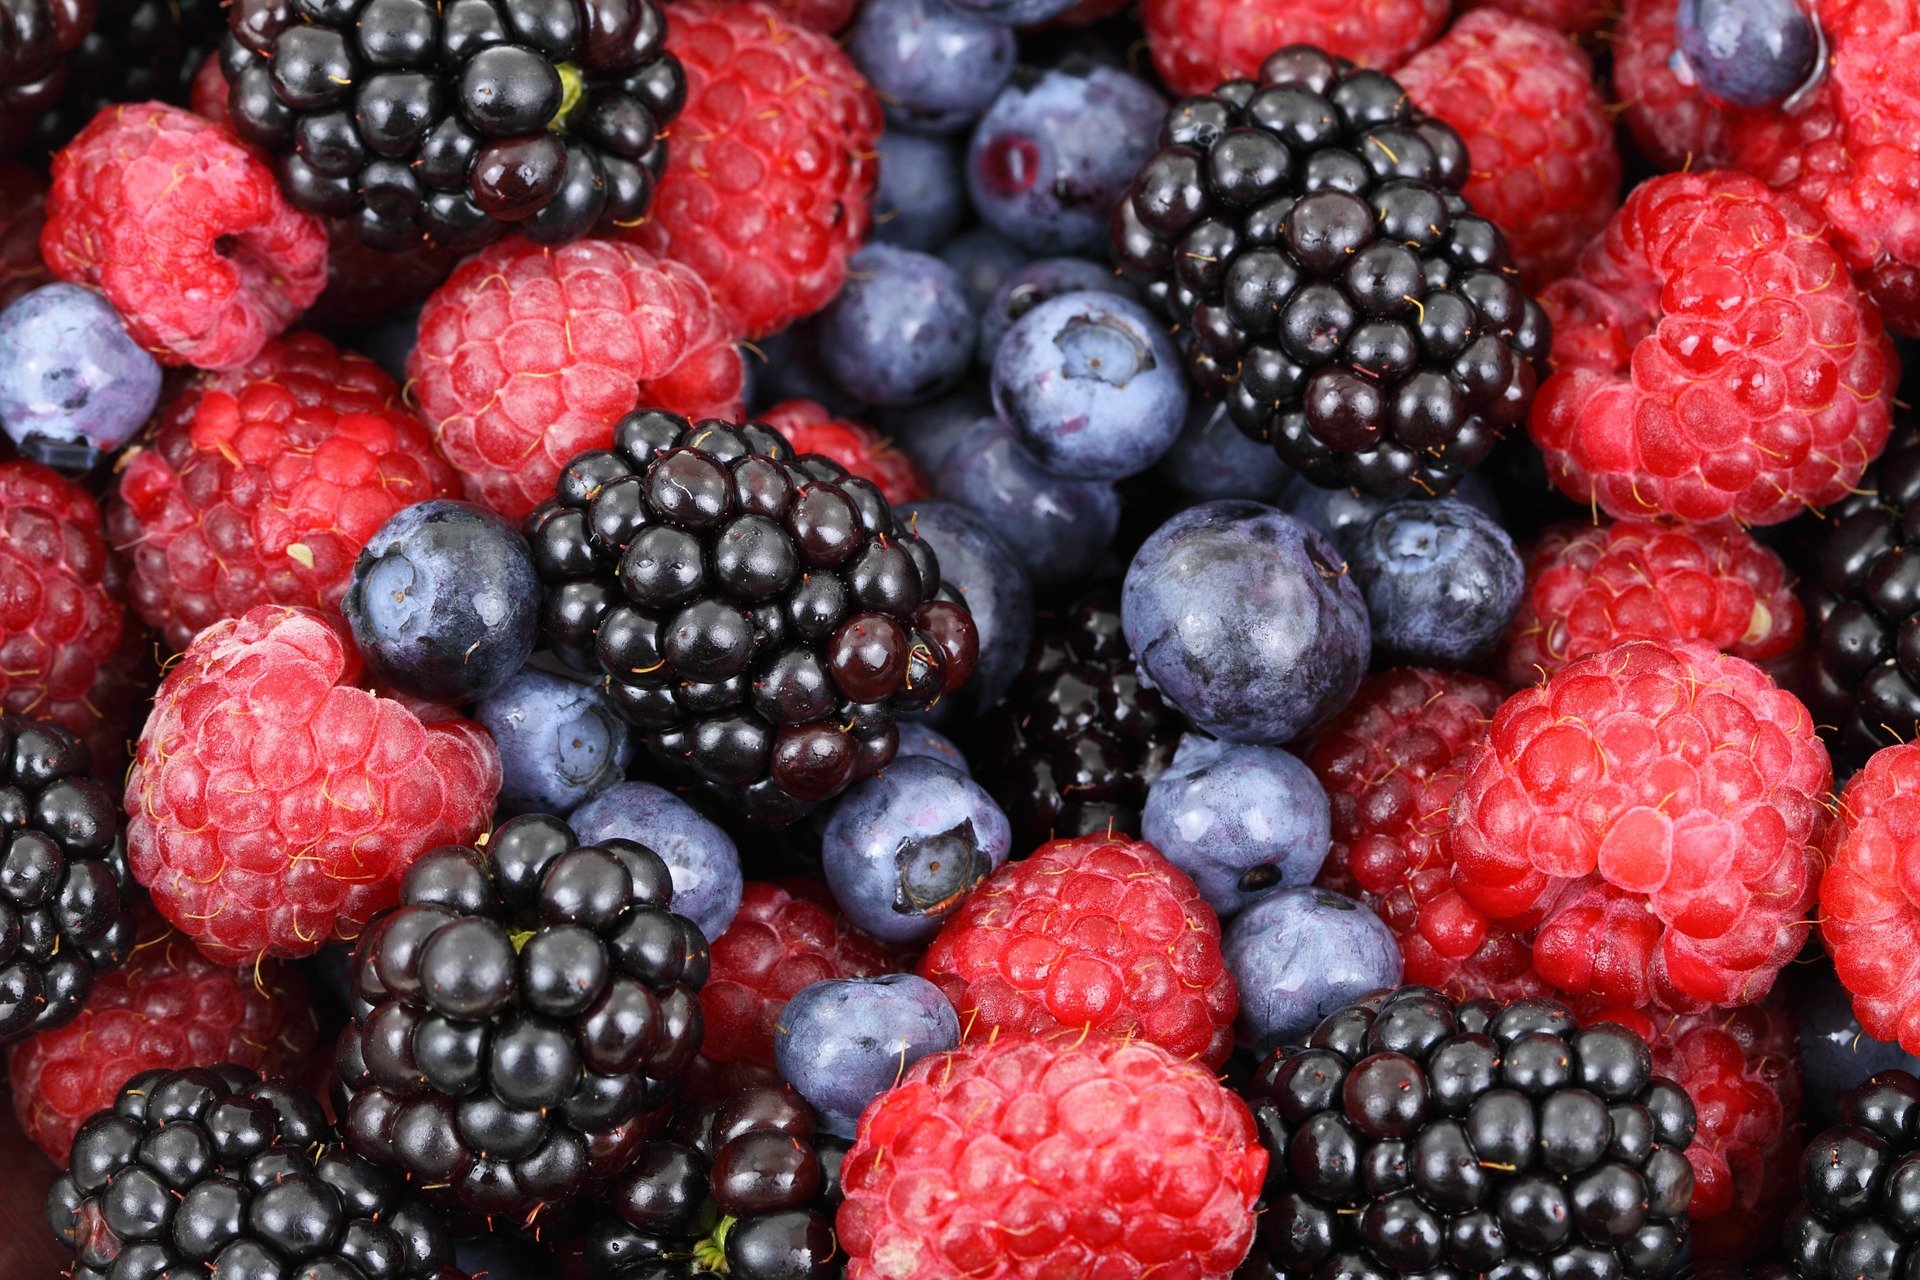 Berries for weight loss